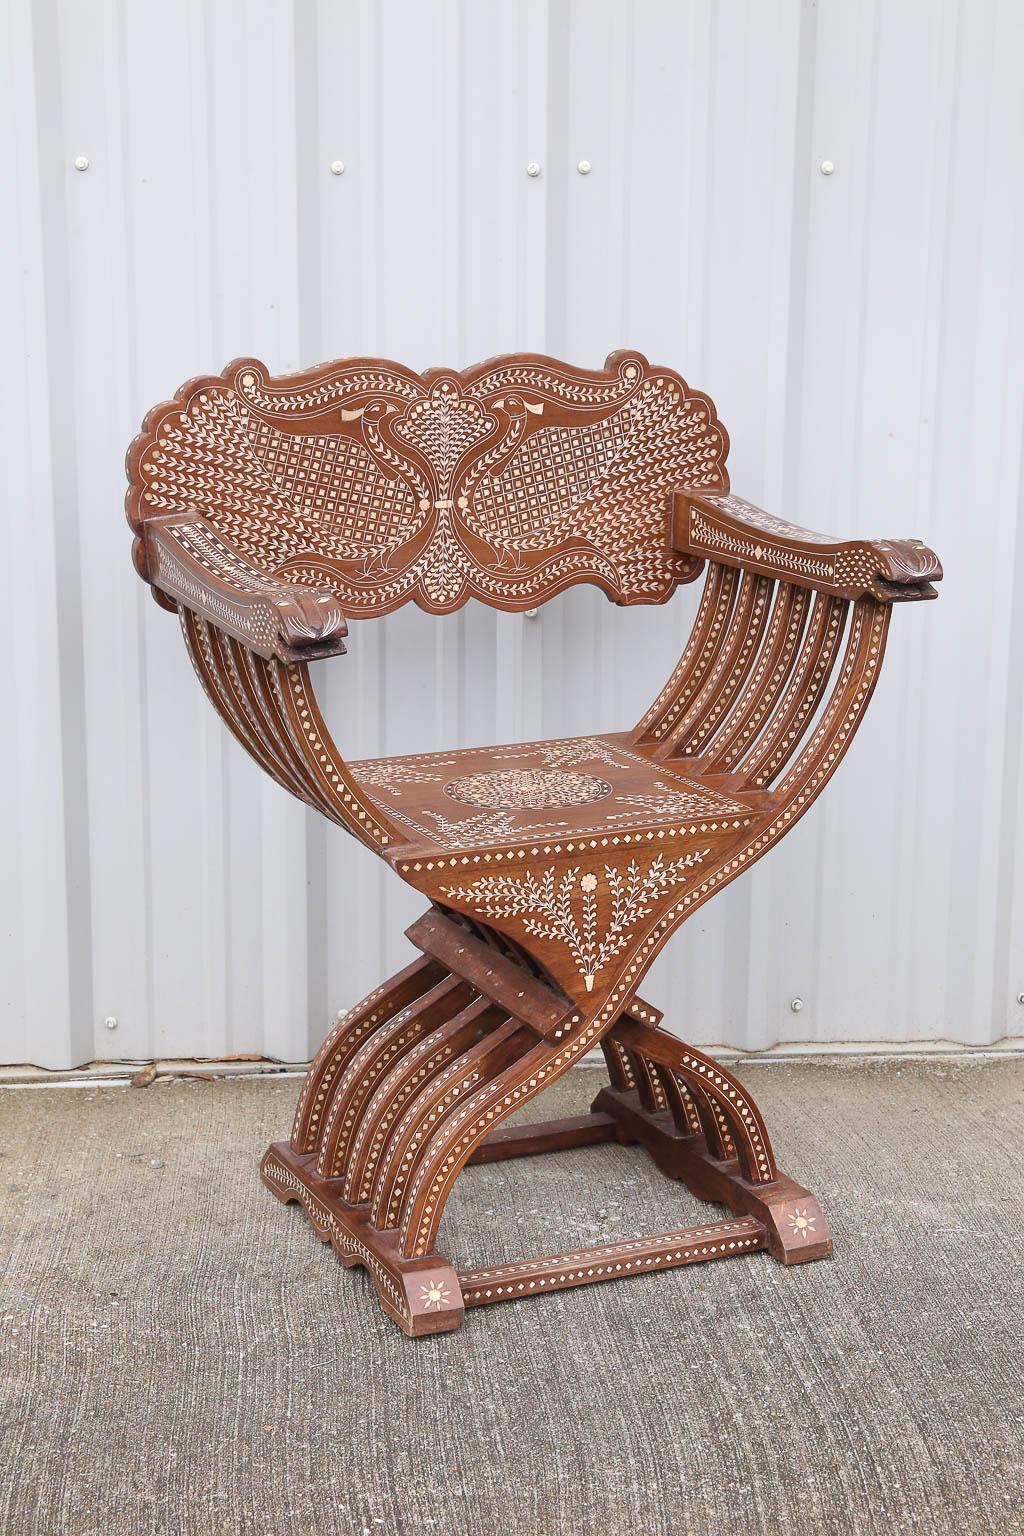 These chairs were made on commission in the 20th century for European missionaries settled in the Coromandel coast of India. These chairs were handcrafted by skilled artisans for the use of missionaries from Europe. The superb inlay work make these